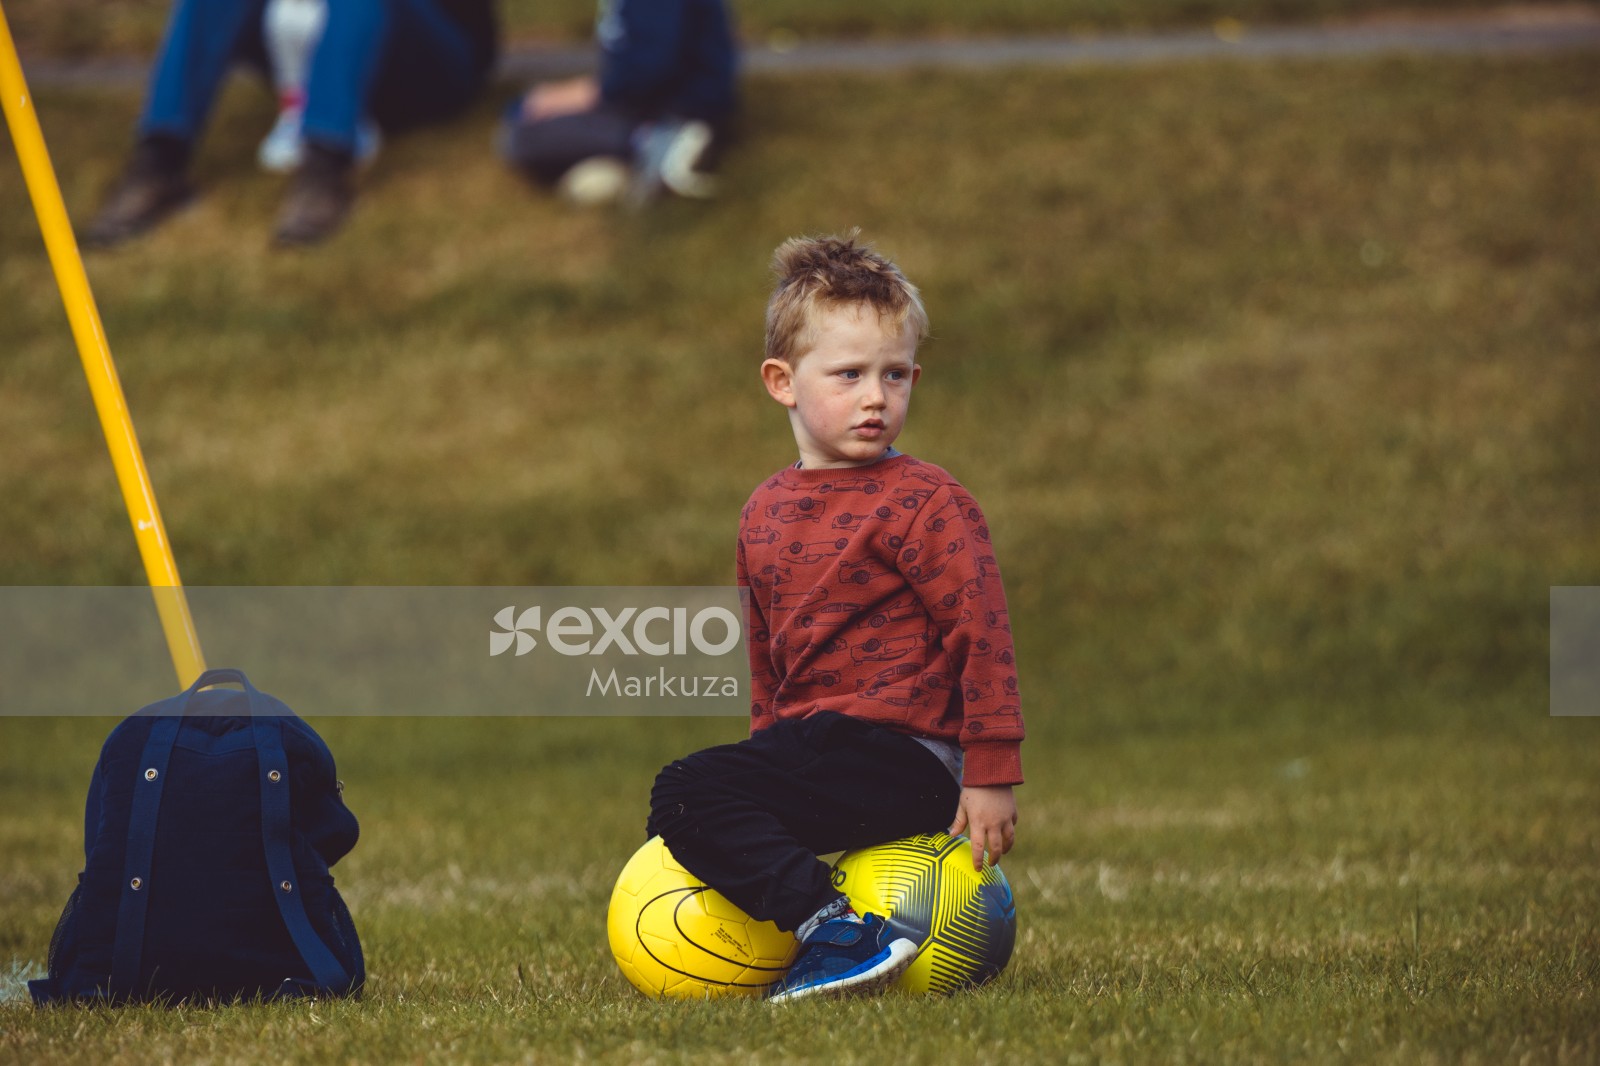 Little boy in red shirt sitting on footballs at Little Dribblers soccer exhibition